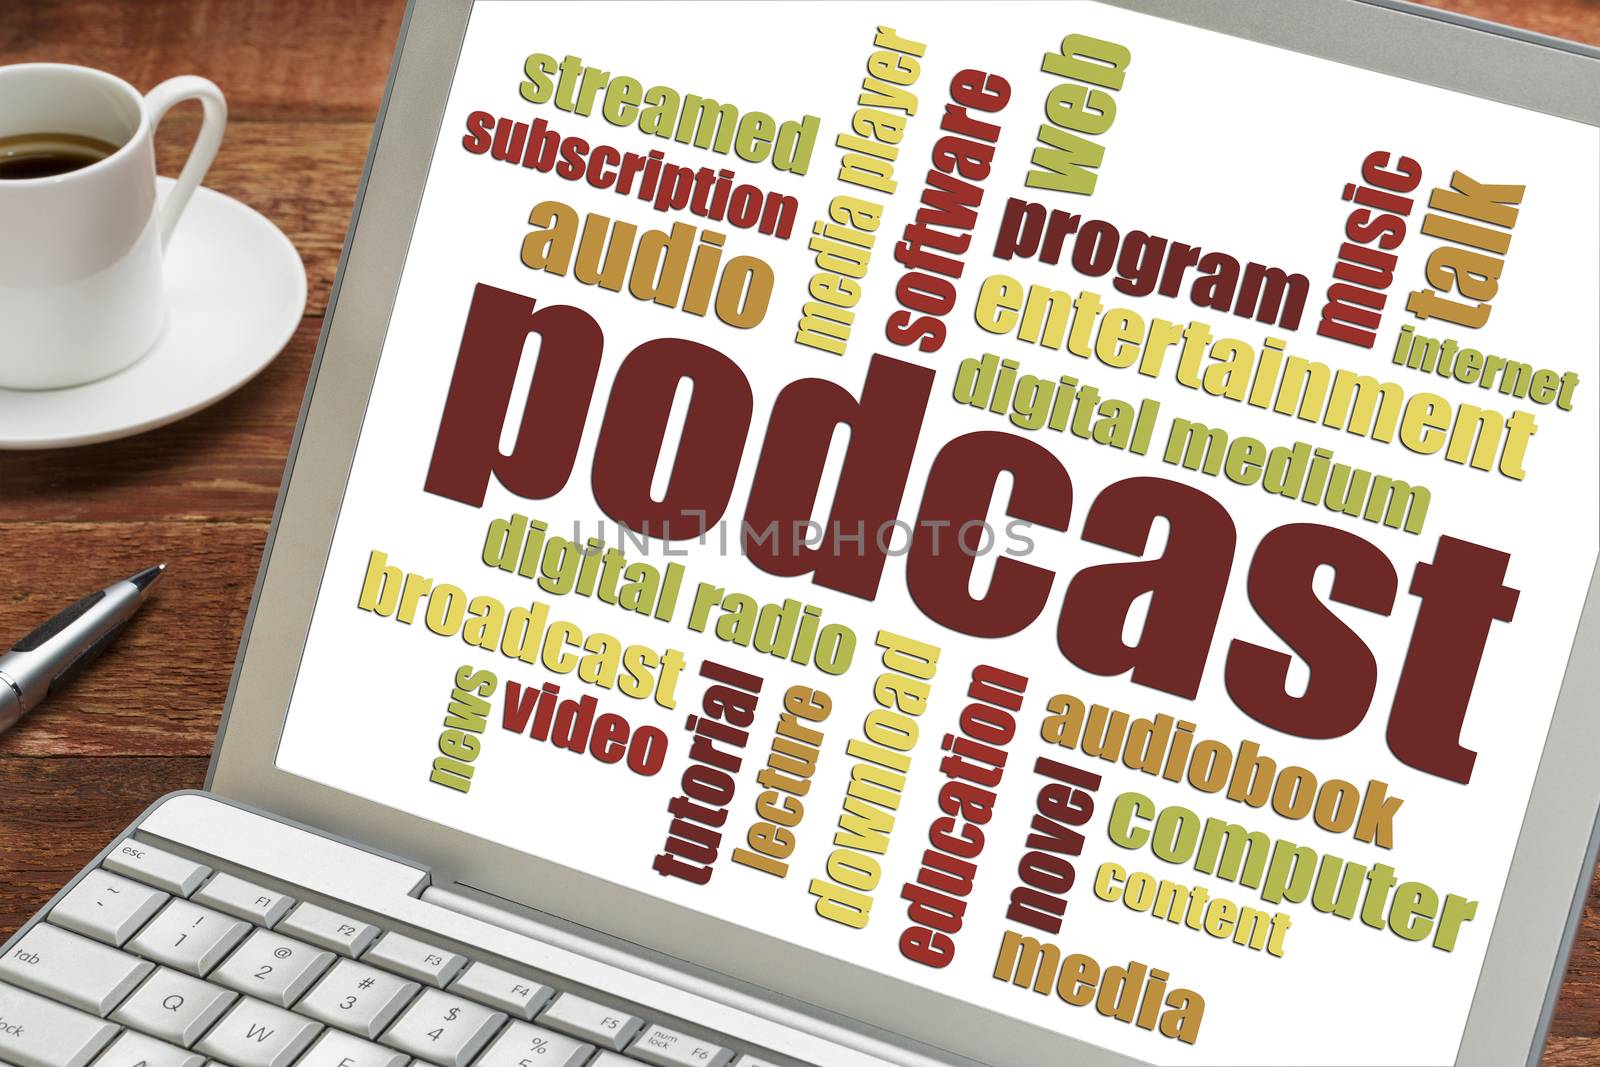 podcast word cloud on a laptop screen with a cup of coffee - internet broadcasting concept